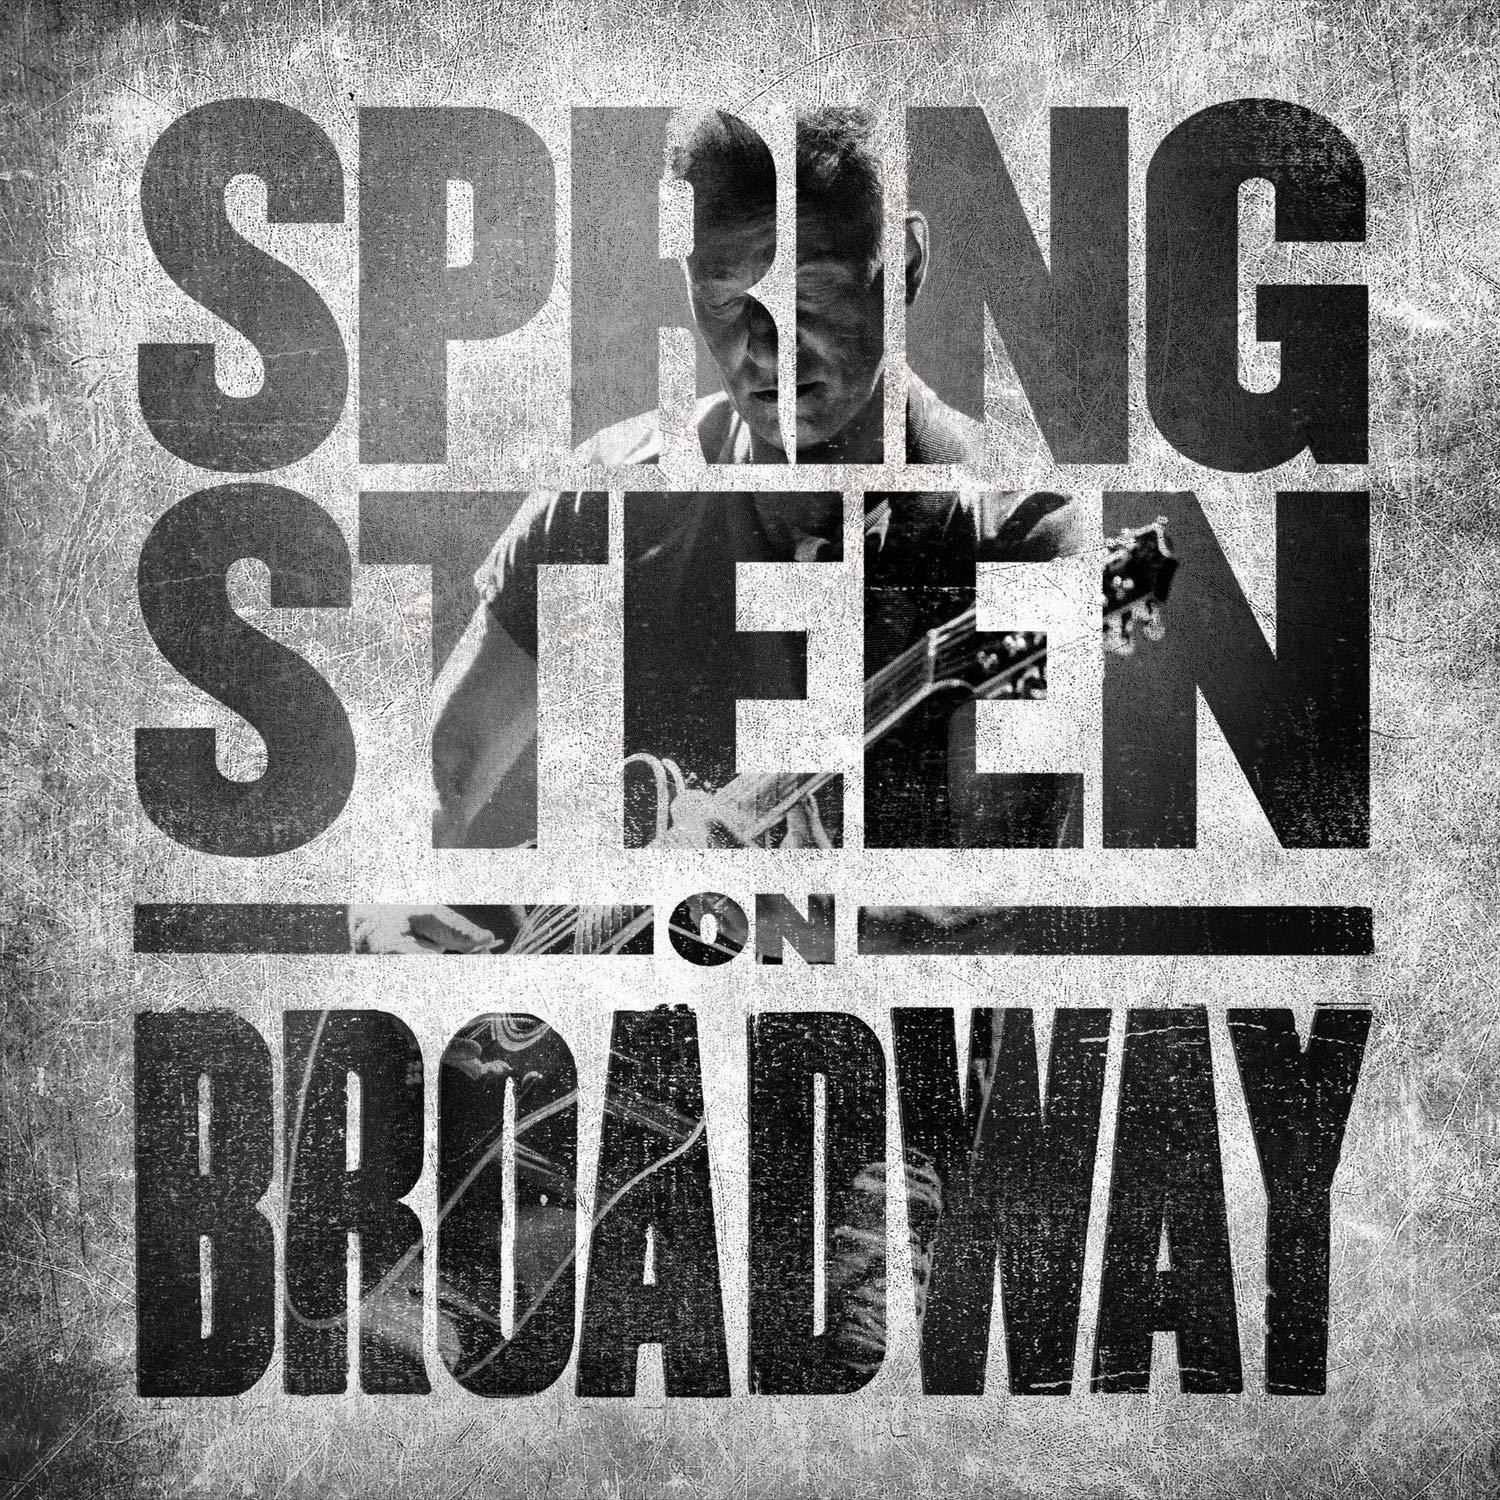 Springsteen On Broadway by Bruce Springsteen (CD)